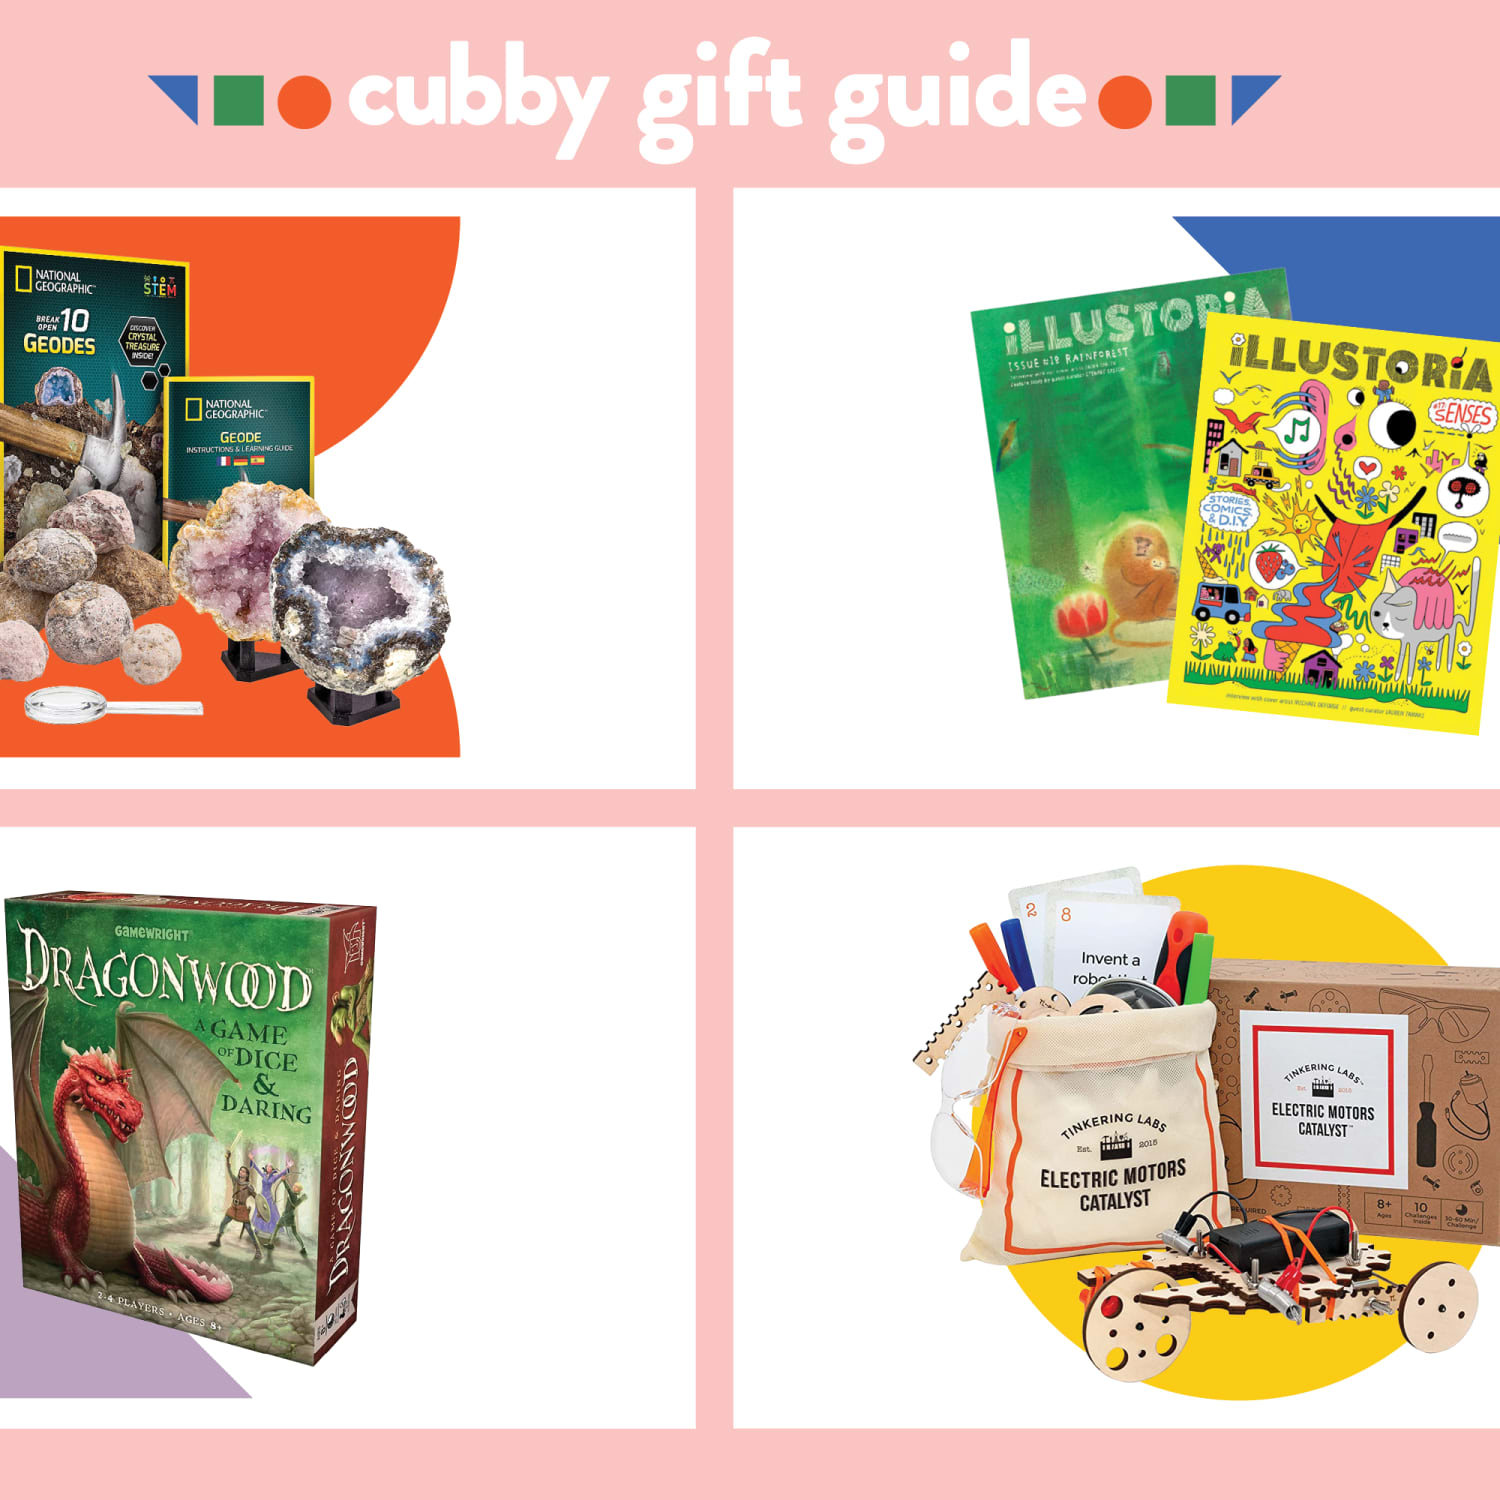 Toys and gifts for 8-year-olds 2021: Best gift ideas to shop right now